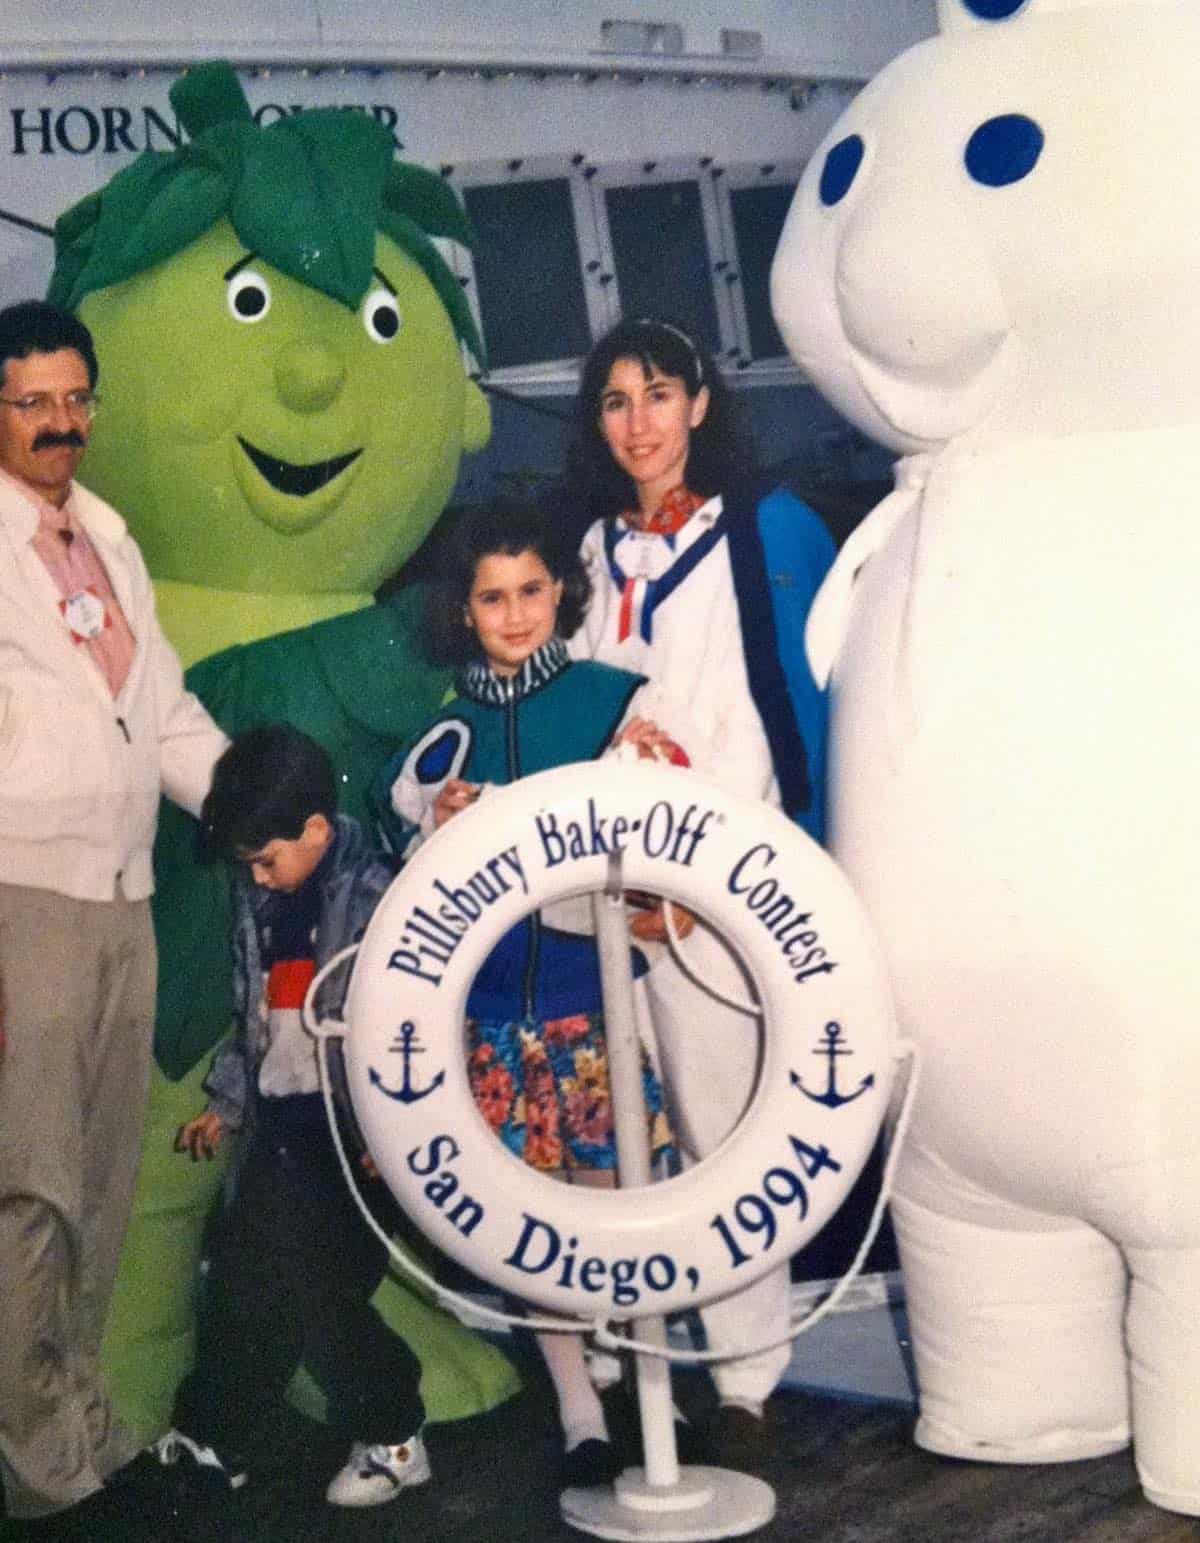 William stepping on the Green Giant's Sprout foot at the Pillsbury bake0ff with my family and doughboy.